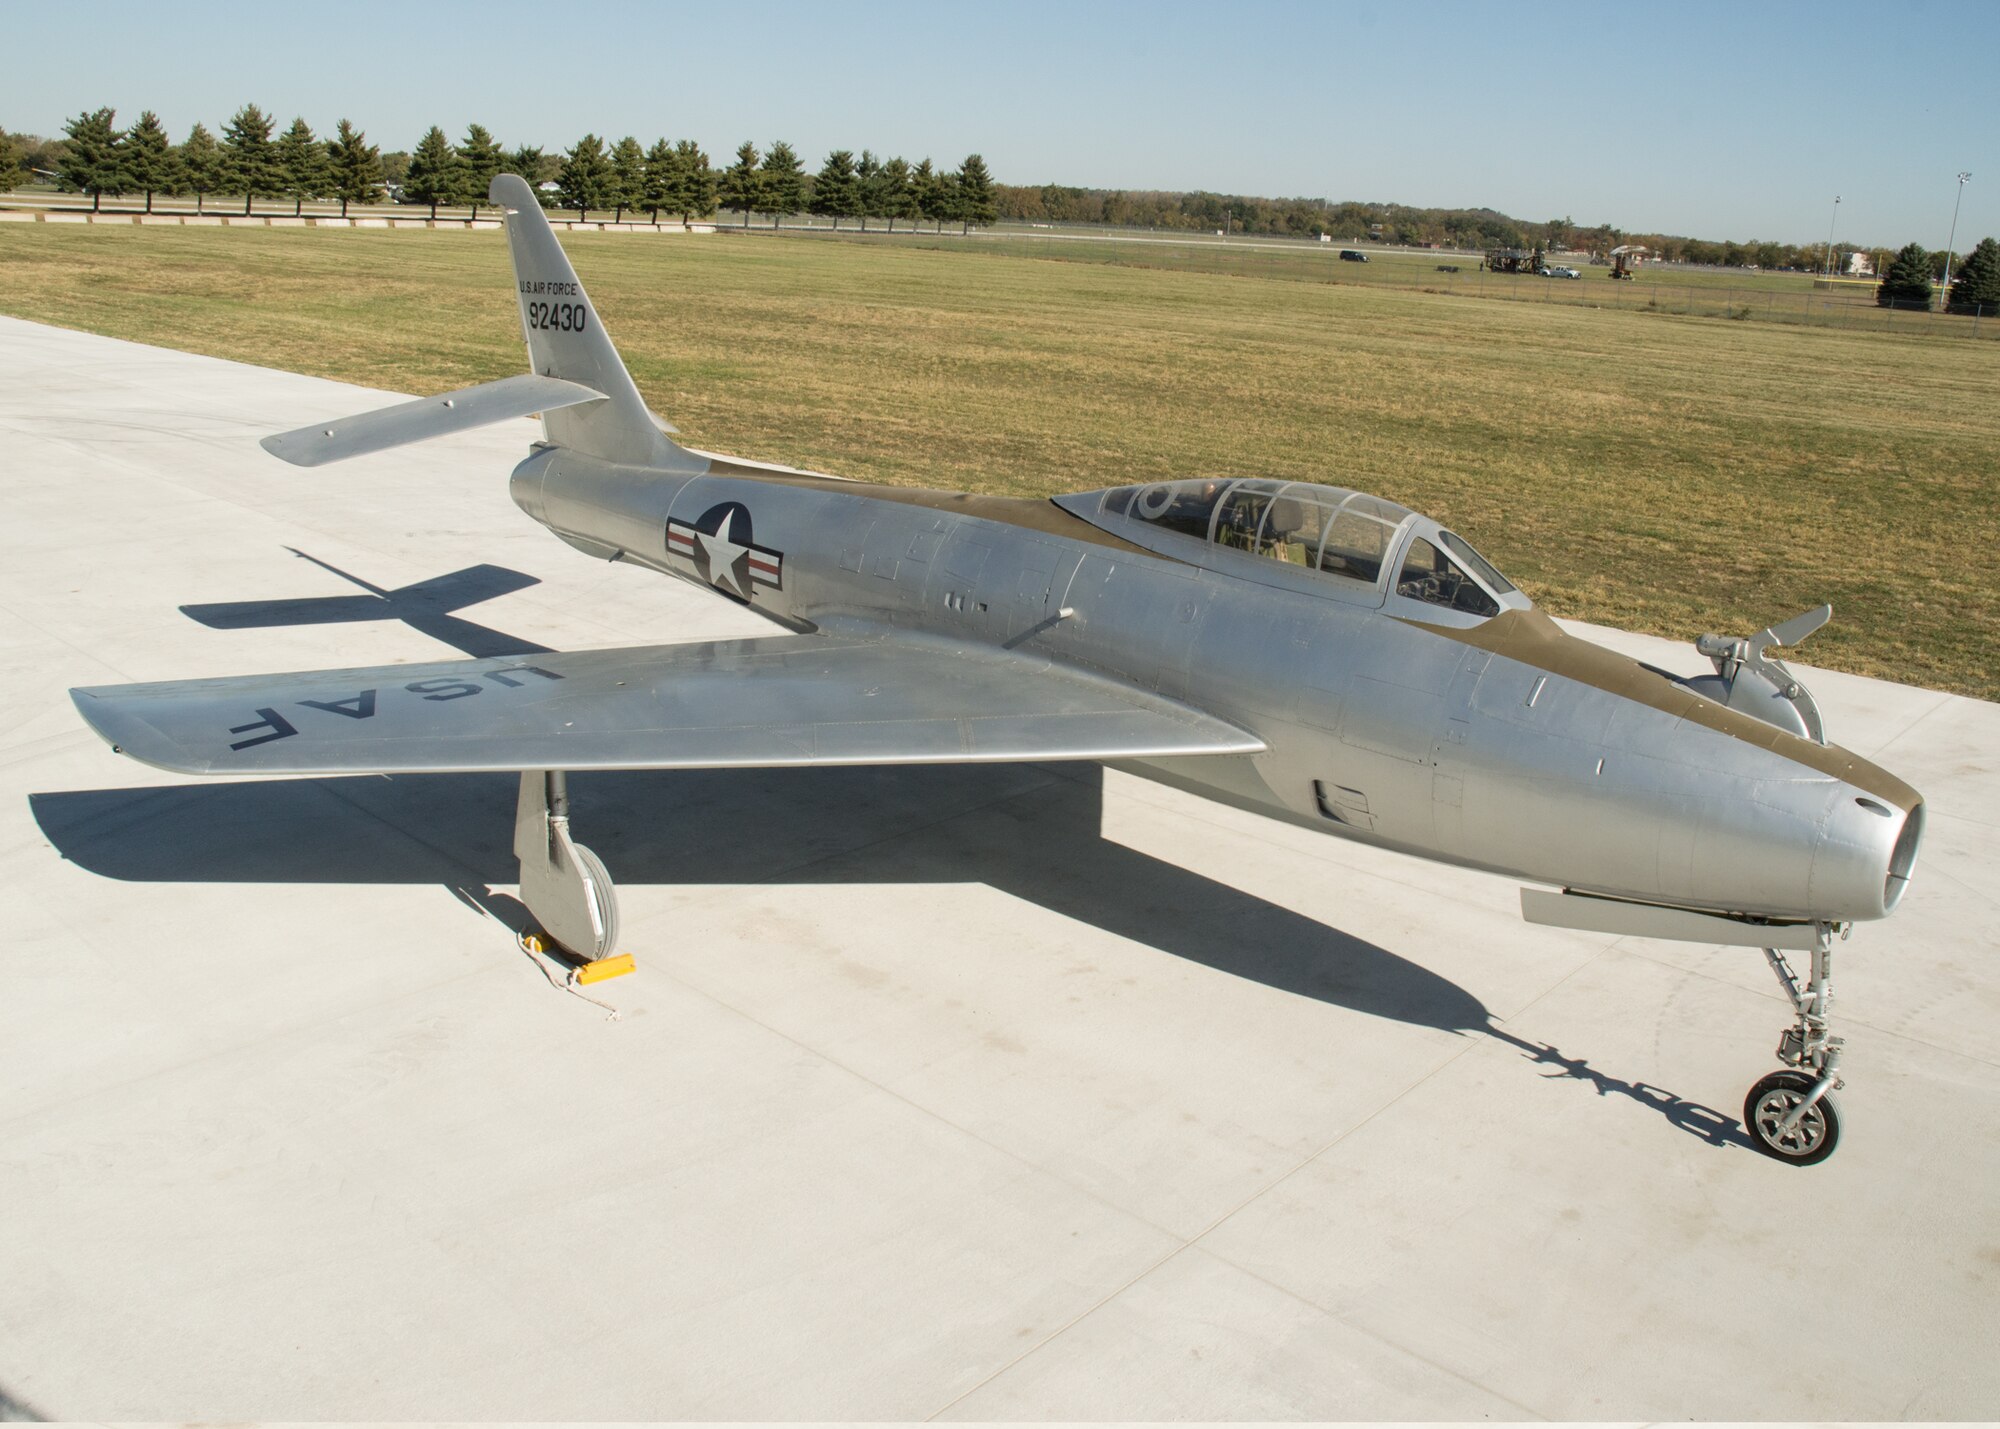 Restoration staff move the Republic YRF-84F Ficon into the new fourth building at the National Museum of the U.S. Air Force on Oct. 8, 2015. (U.S. Air Force photo by Ken LaRock)